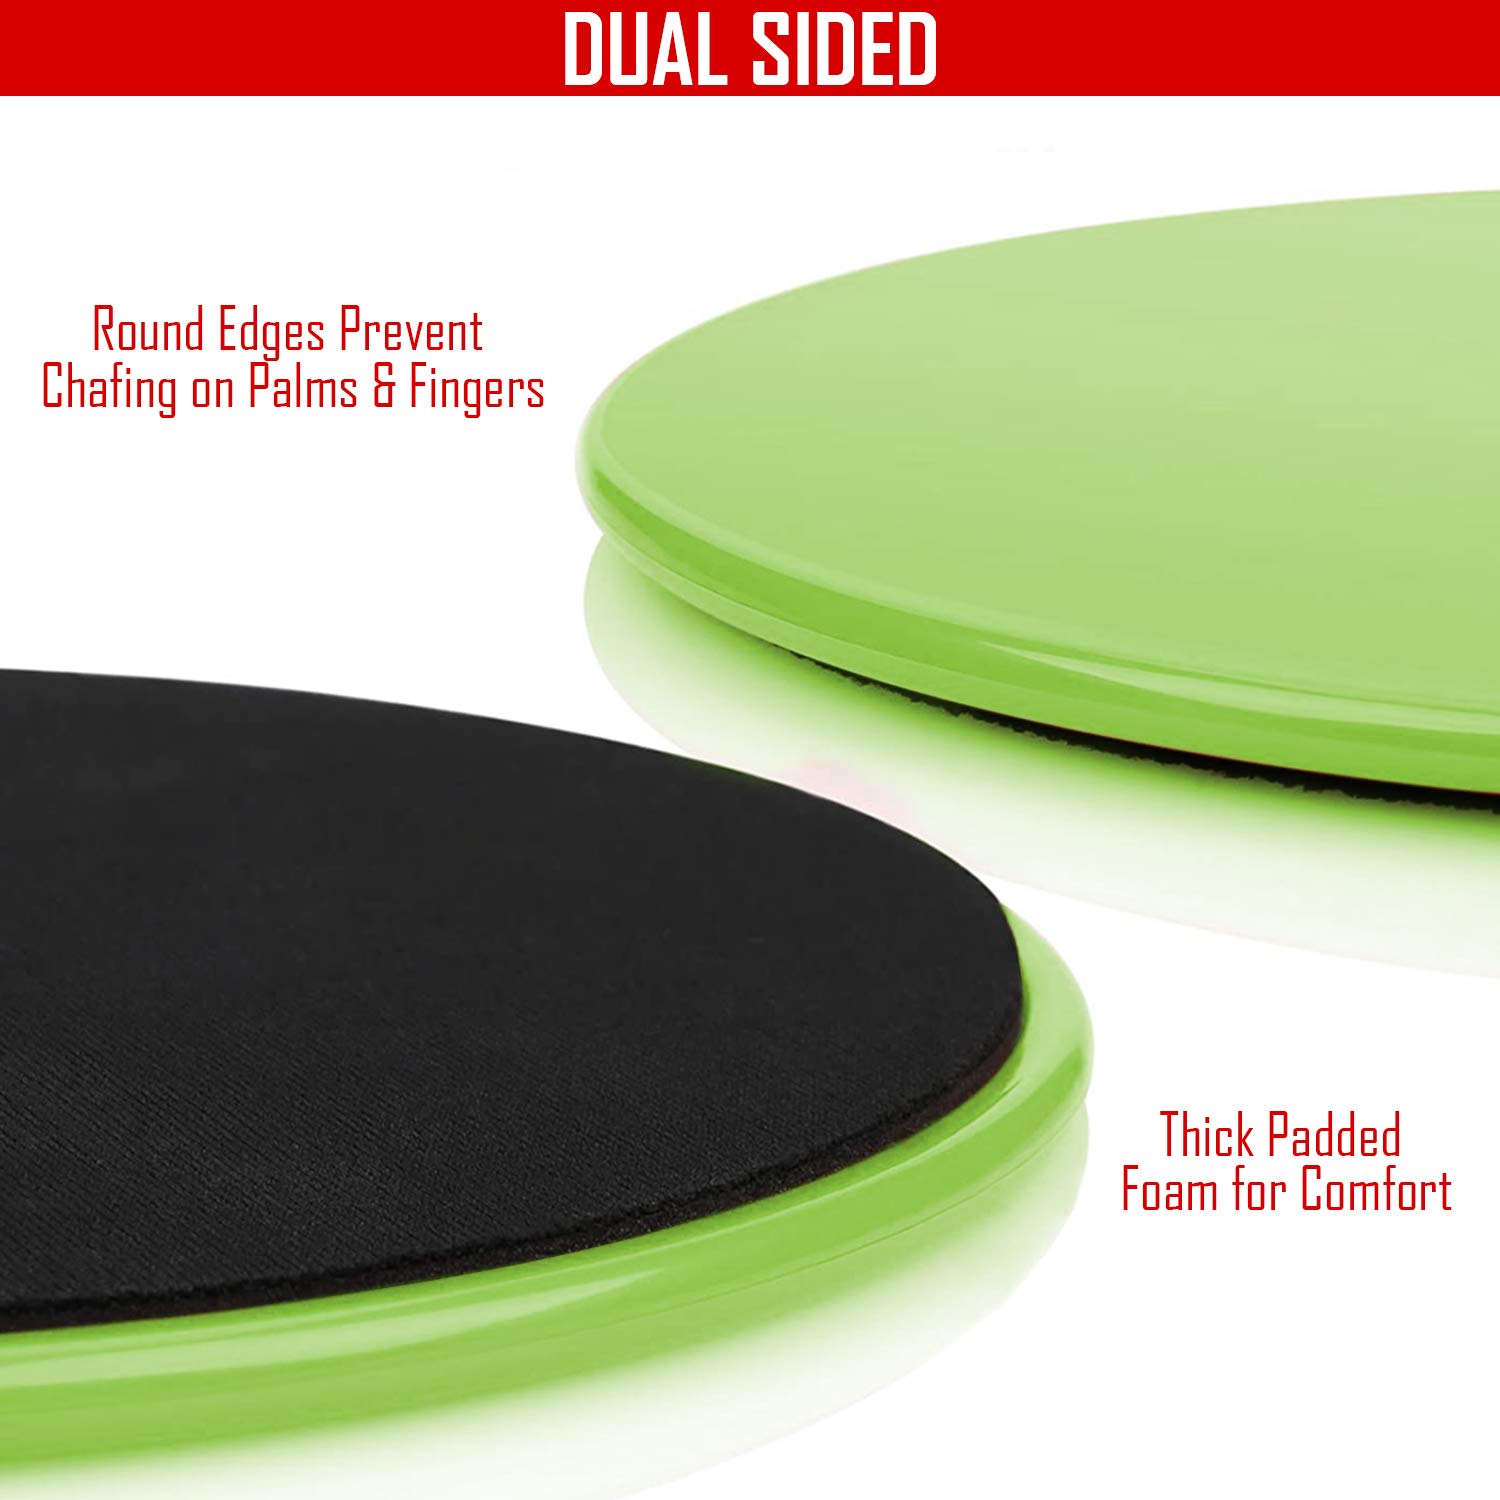 Gliding Discs Core Sliders Exercise Sliders,Dual Sided Gliding Slider for  Carpet or Hard Floors Core Fitness Ultimate Core Training Gym and Full Body  Workout's at Home or Travel 